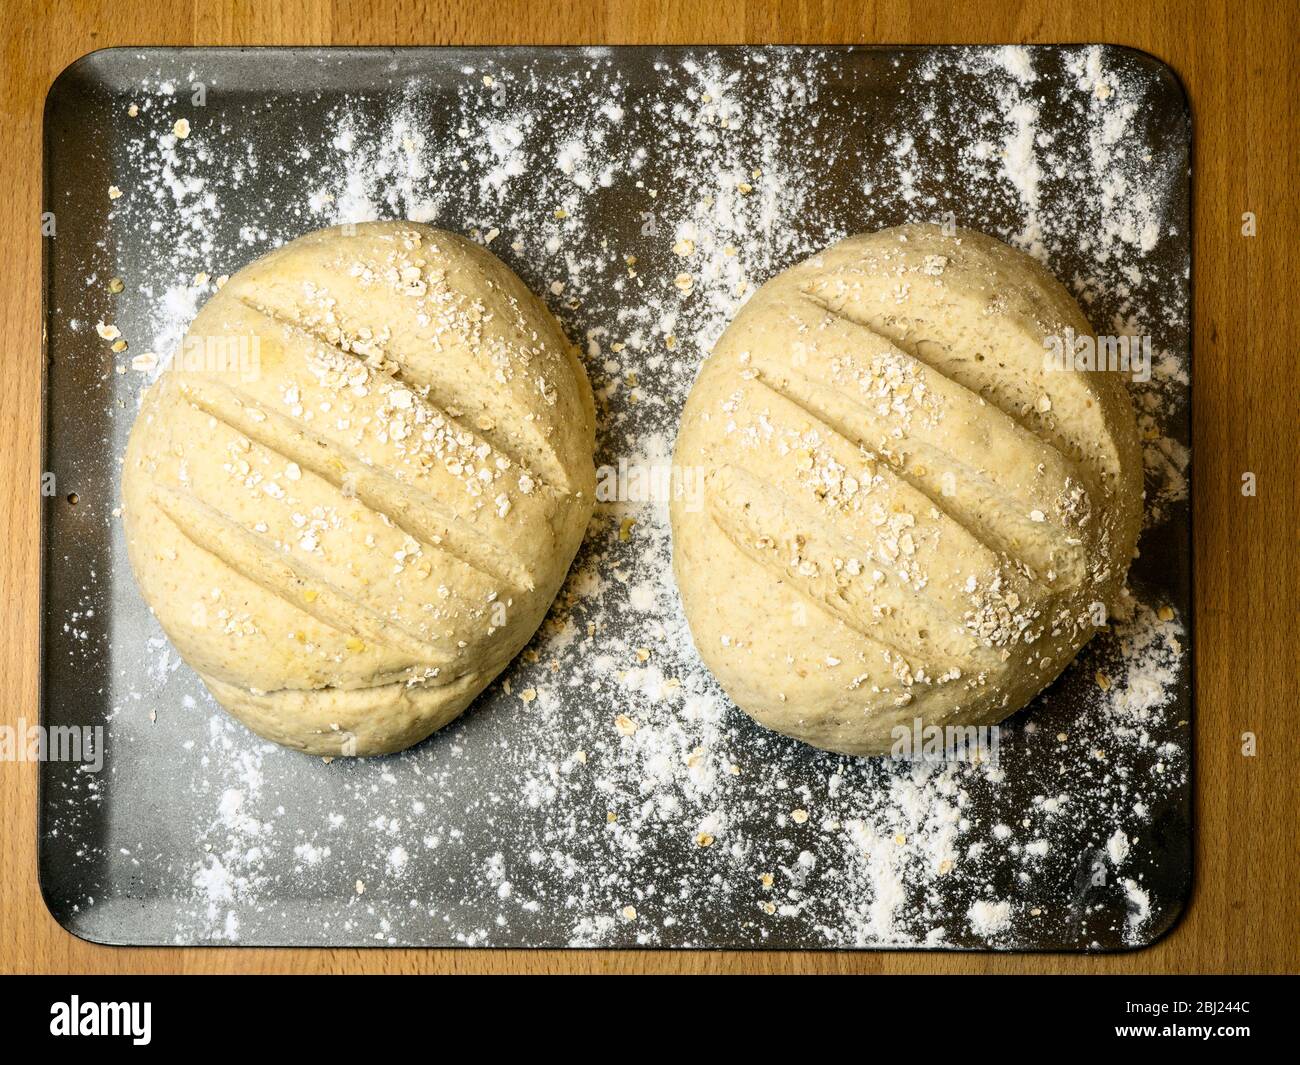 Two proved oat bread loaves ready for baking on a floured baking sheet Stock Photo